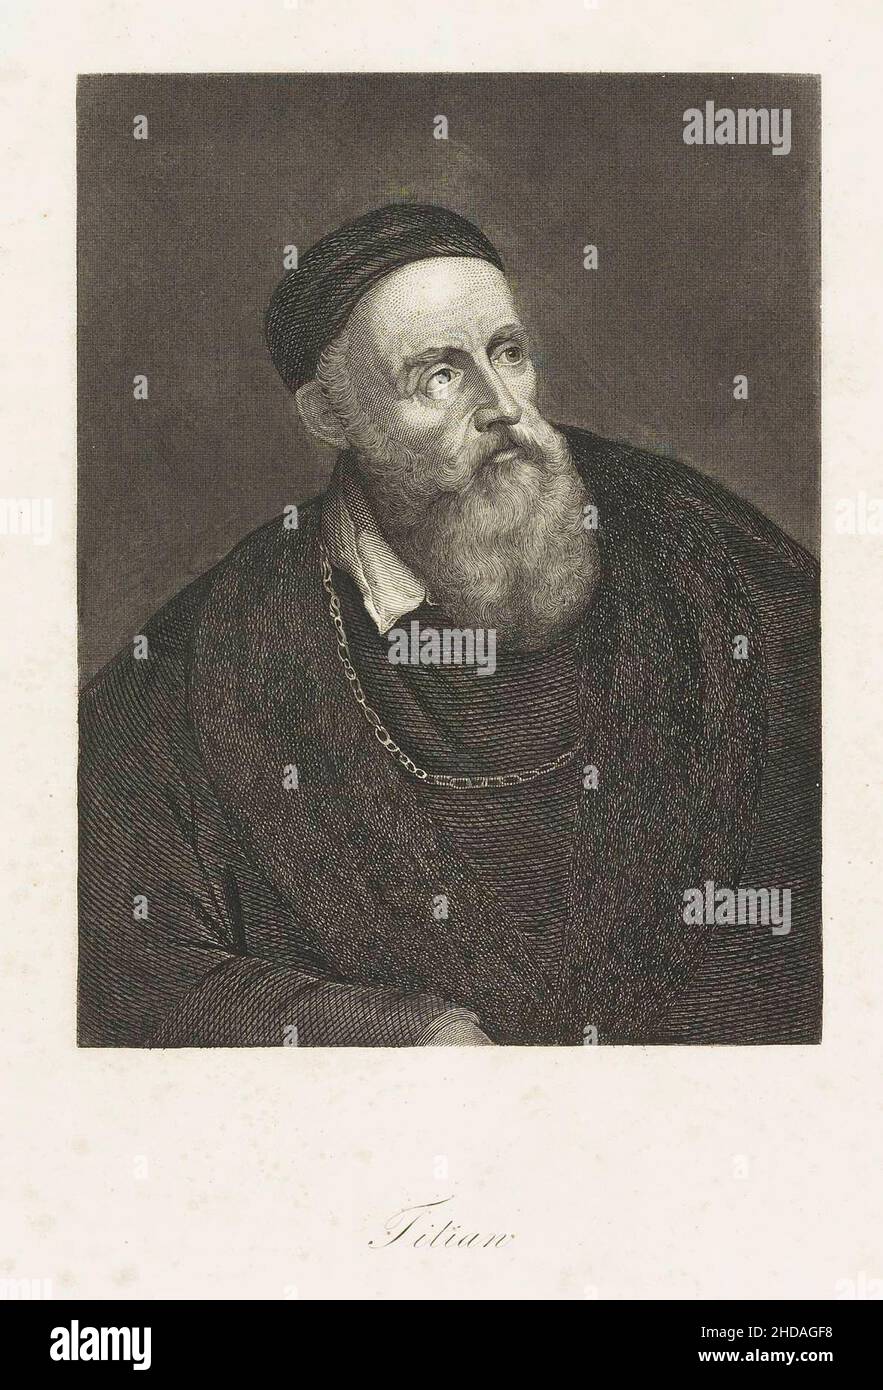 Engraving portrait of Titian.  Tiziano Vecelli or Vecellio (c. 1488/90 – 1576), known in English as Titian, was an Italian (Venetian) painter during t Stock Photo